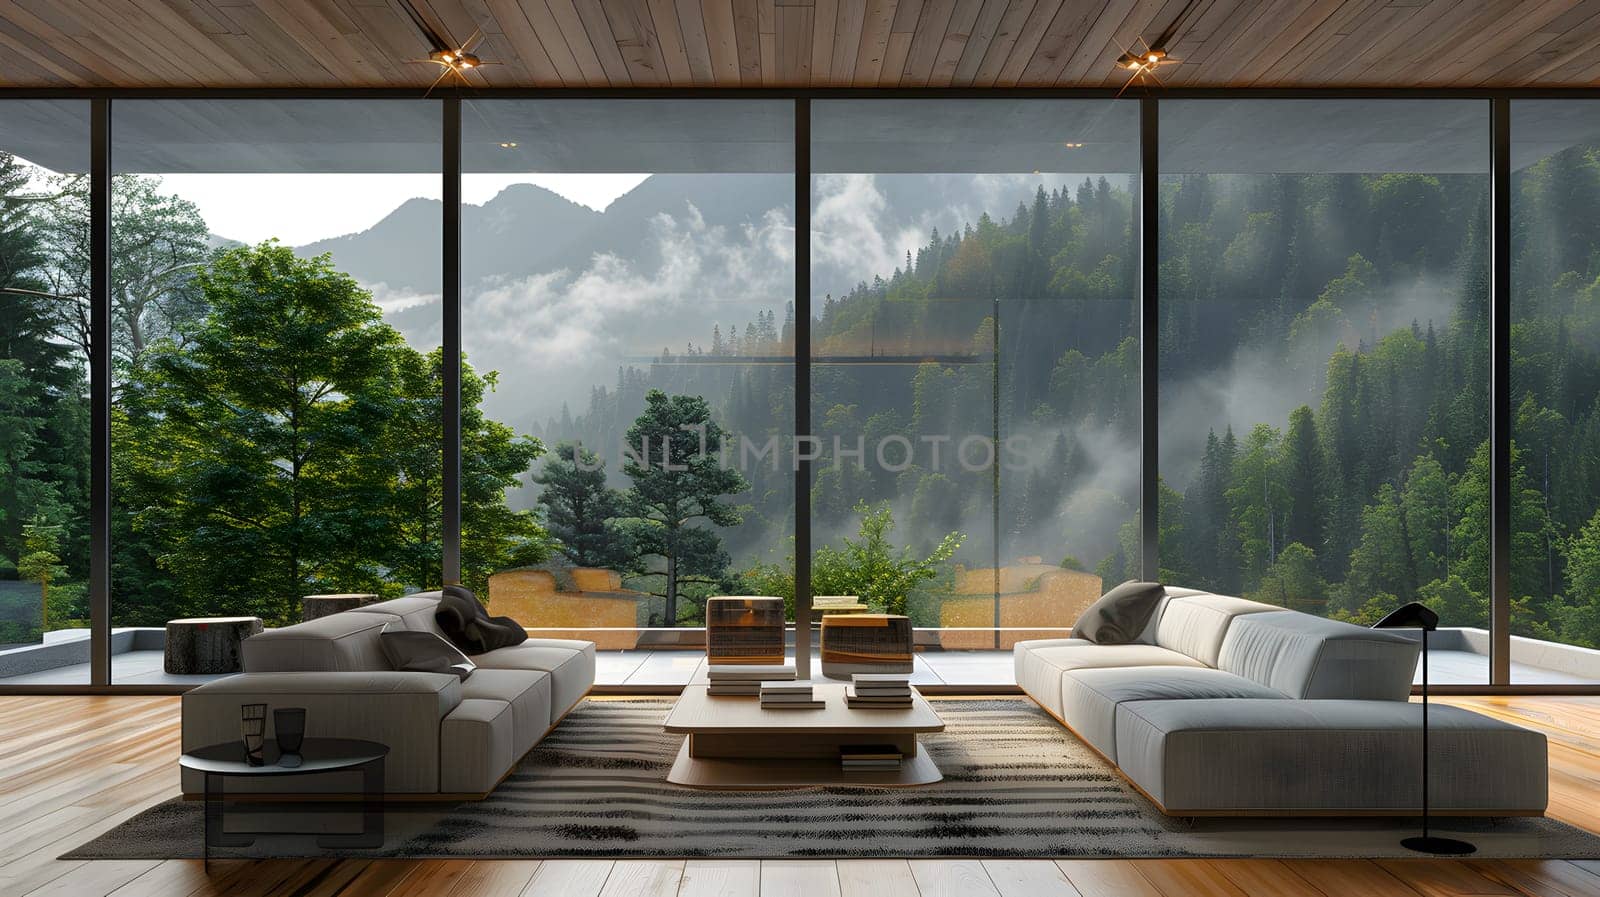 A property featuring a living room with numerous windows offering a picturesque view of the forest. The interior design includes wooden fixtures and flooring, enhancing the connection with nature